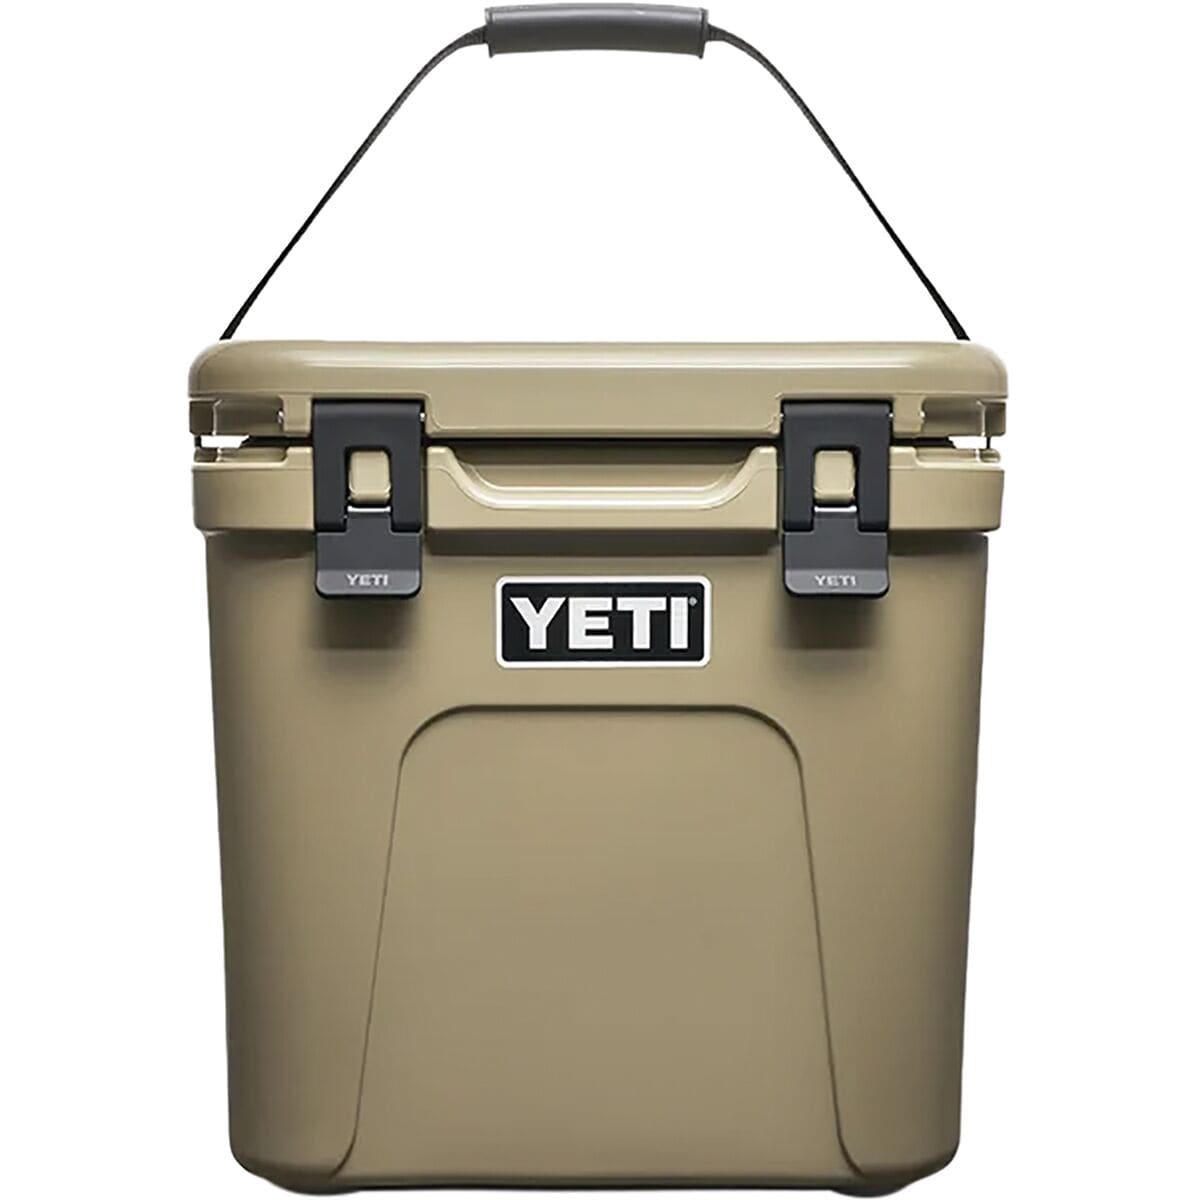 YETI Roadie 24 Rescue Red - Backcountry & Beyond